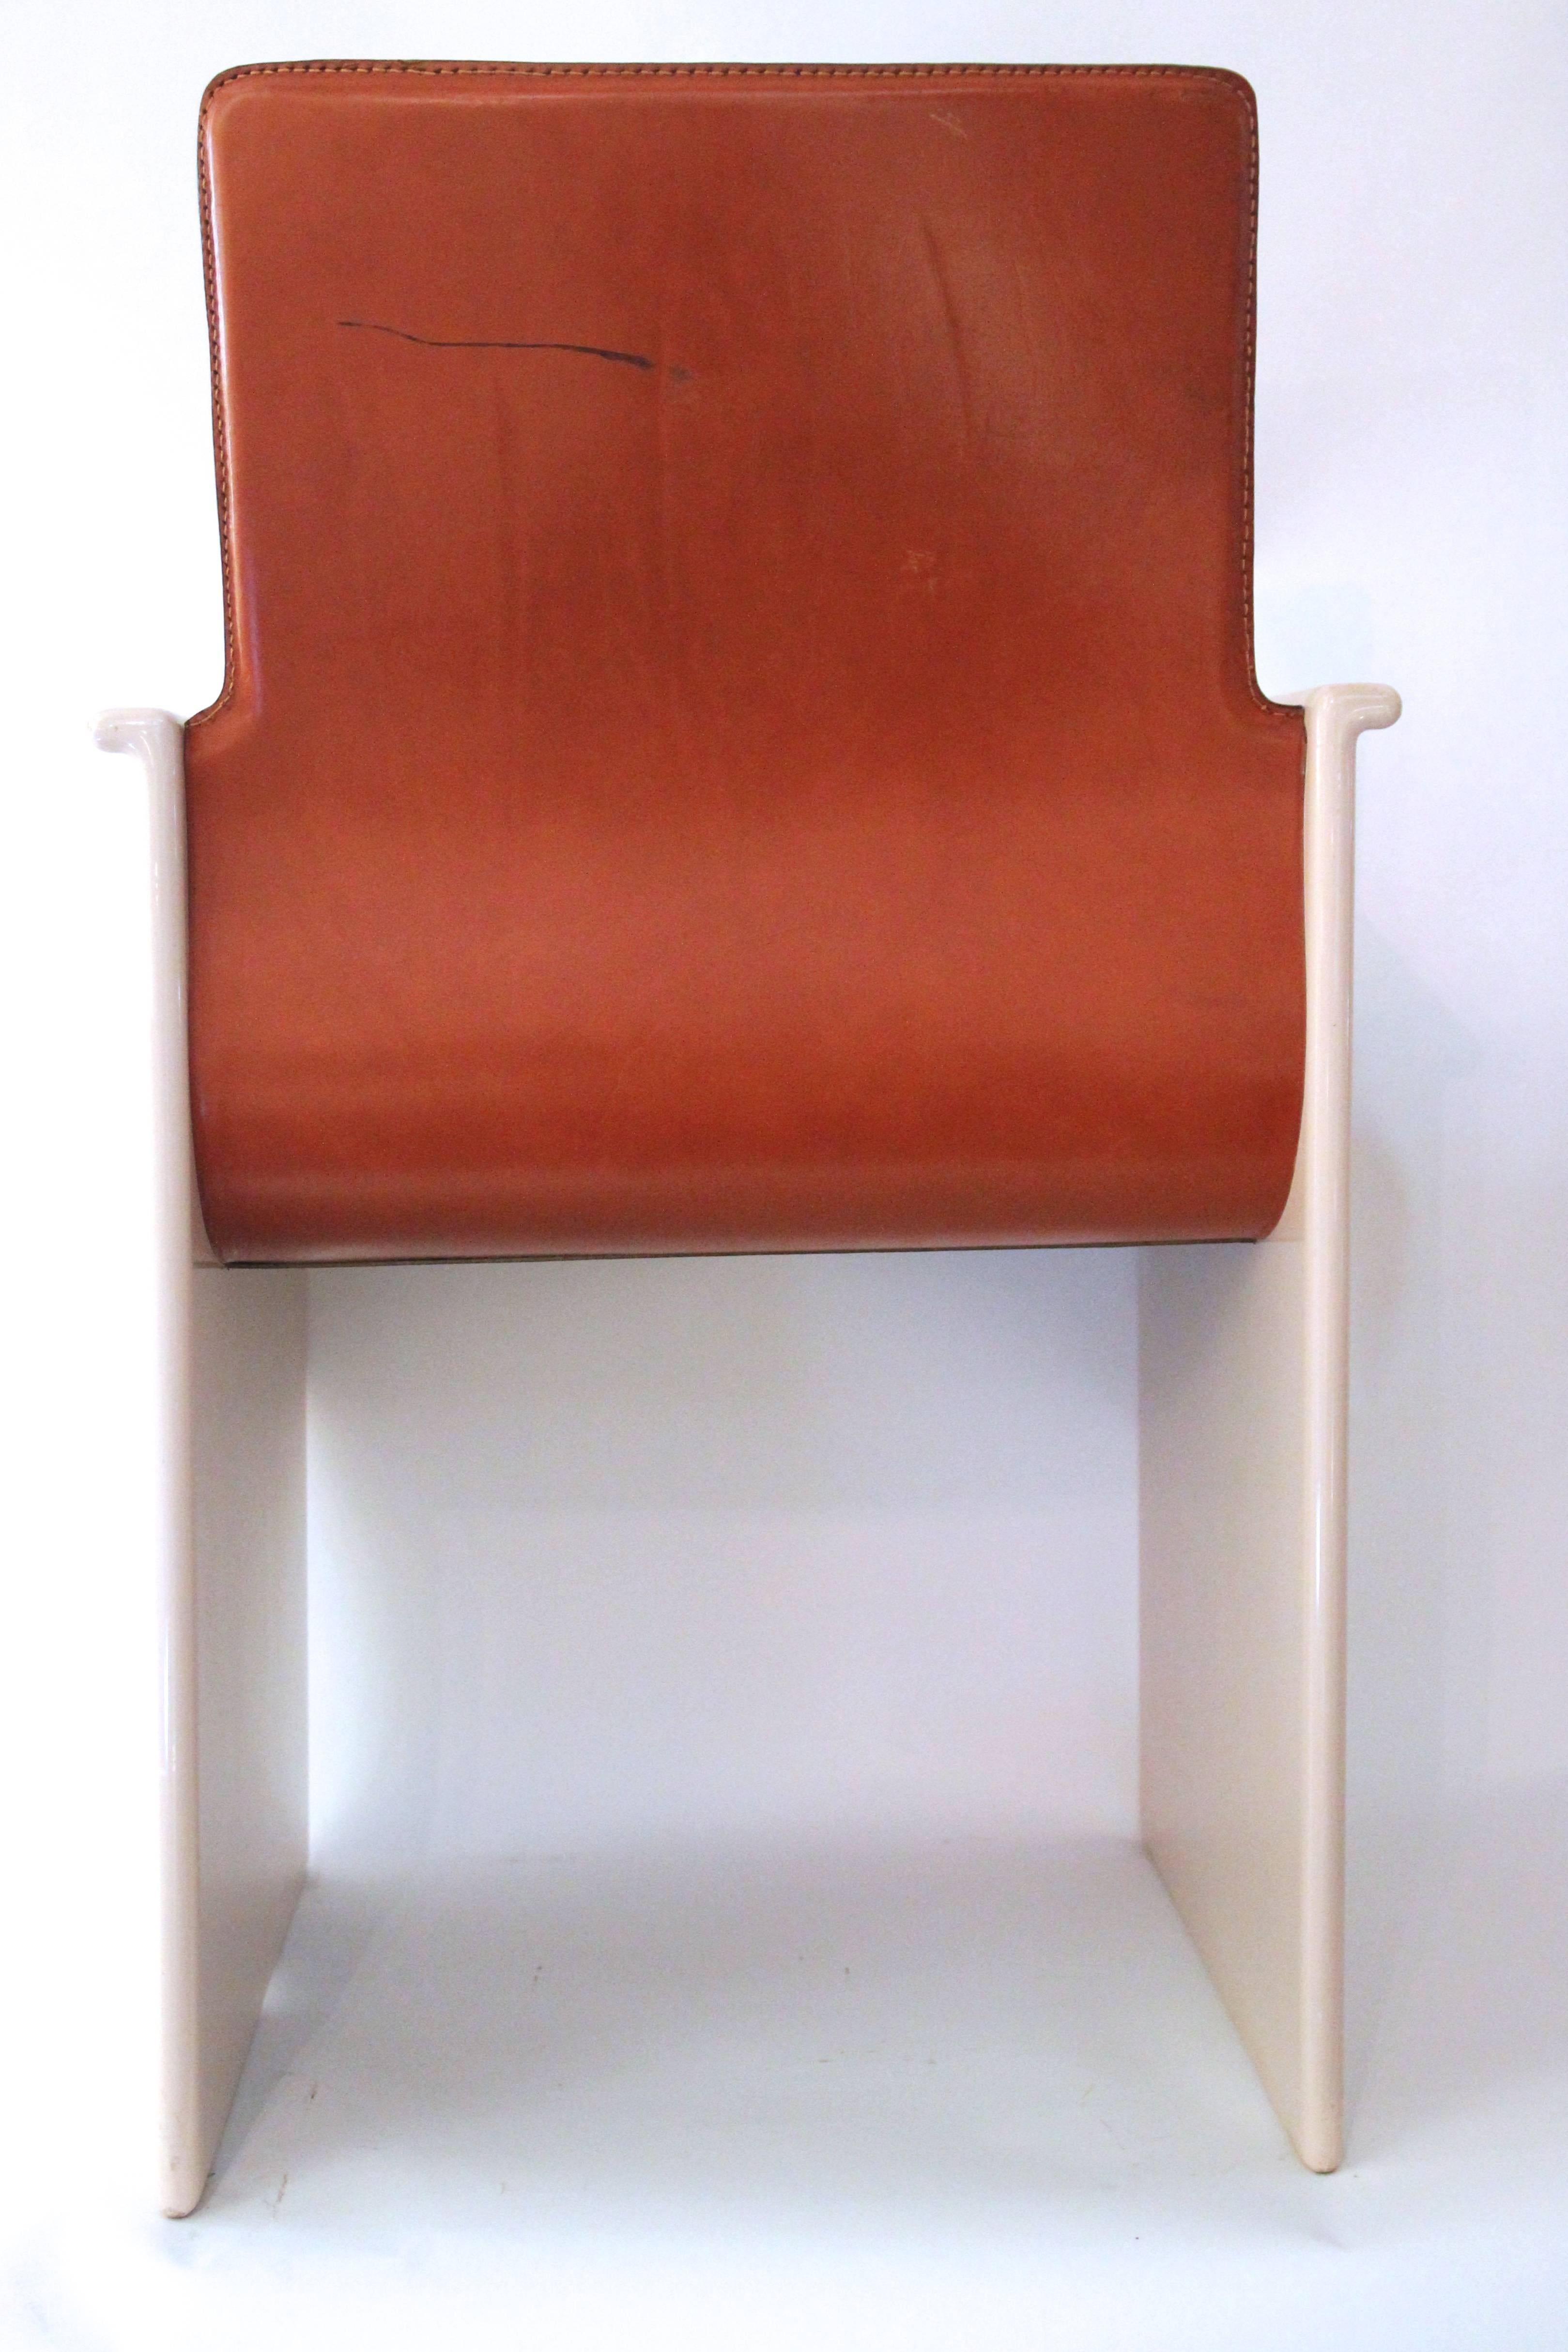 Scarpa, pair of armchairs,
Leather and pink lacquer,
circa 1970, Italy.
Height: 82 cm seat height: 42 cm, width: 50 cm, depth: 42 cm.